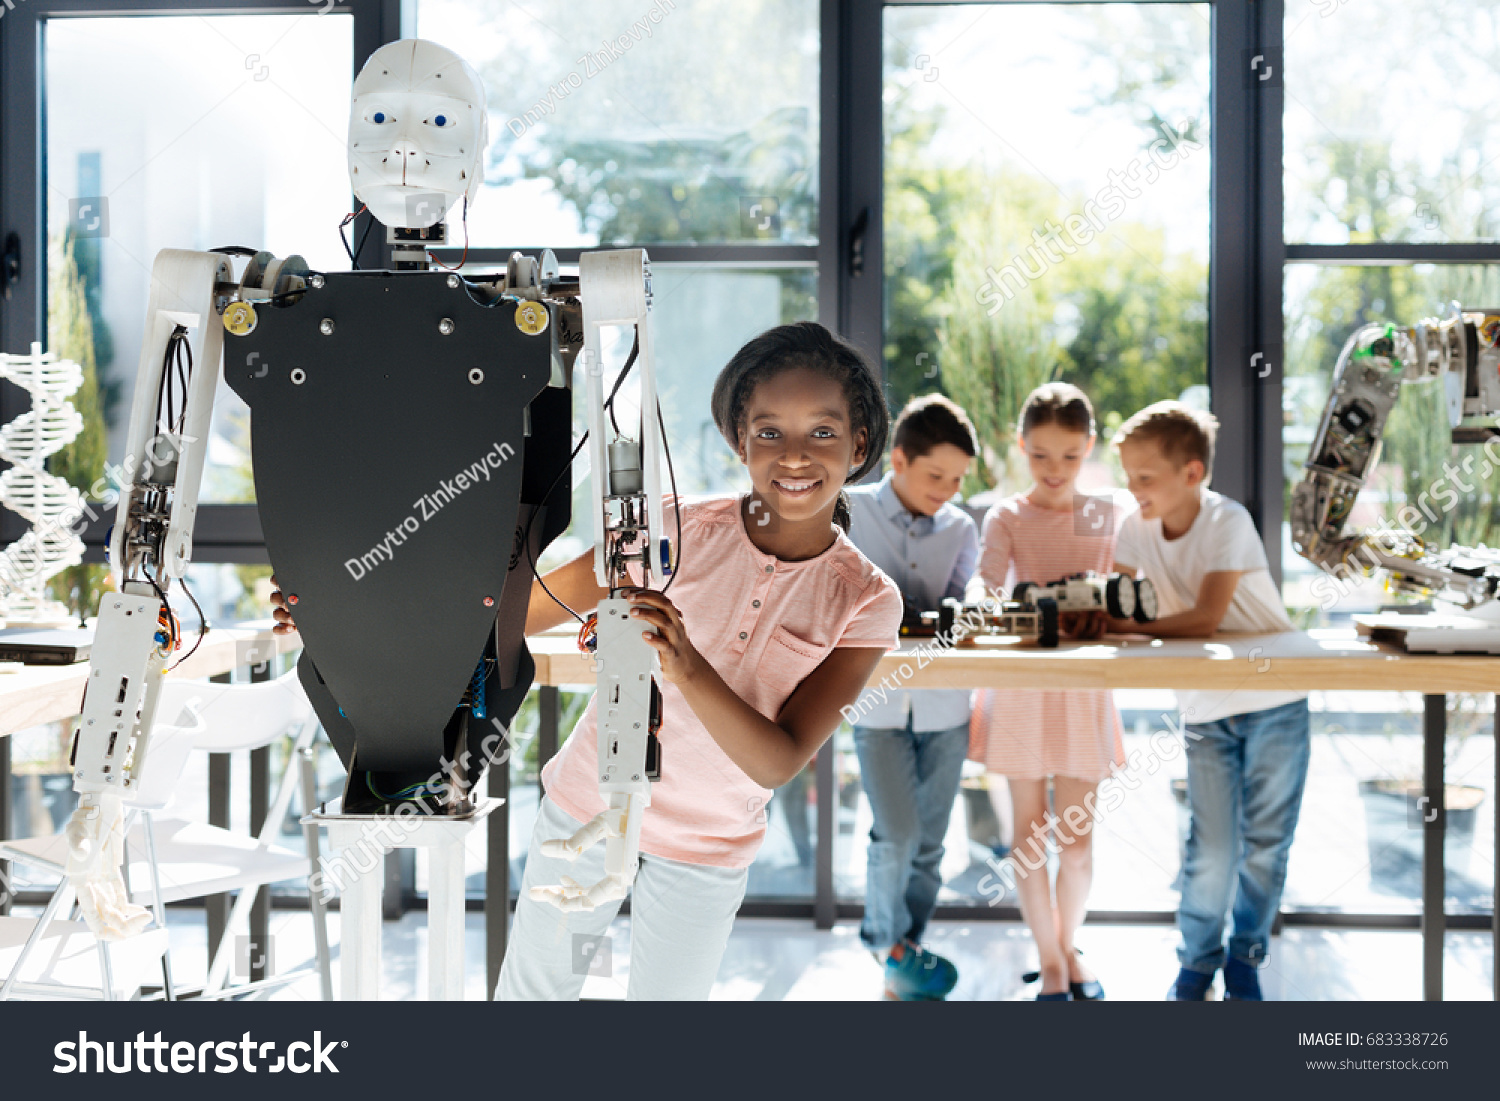 Pleasant girl looking out from behind a human robot #683338726